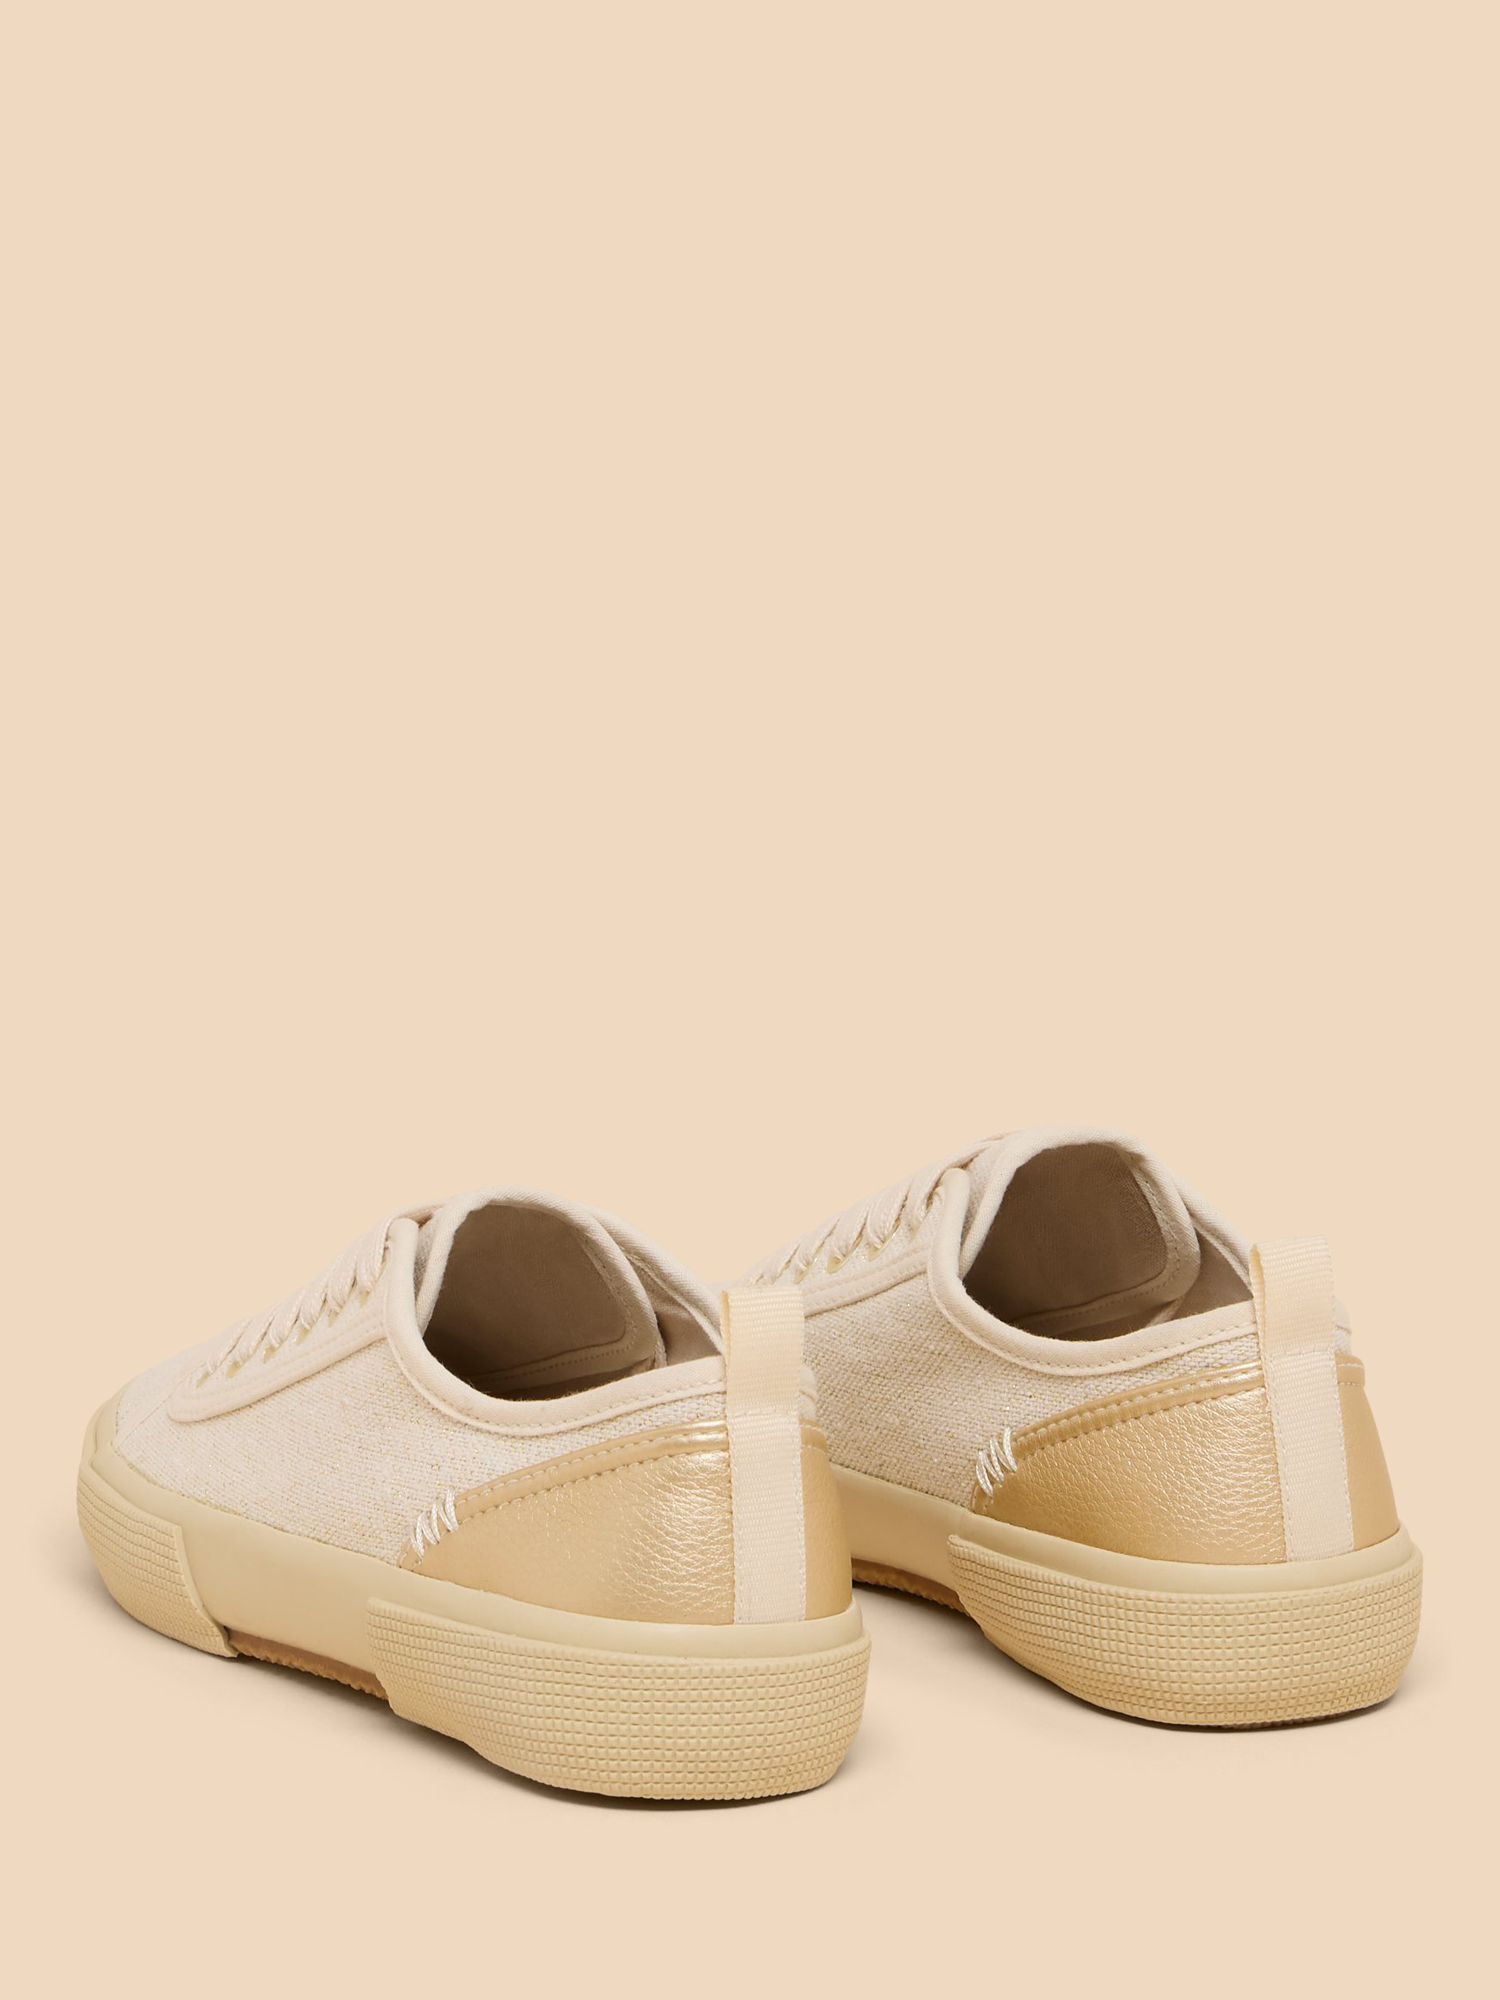 Buy White Stuff Pippa Canvas Lace Up Trainers, Light Natural Online at johnlewis.com